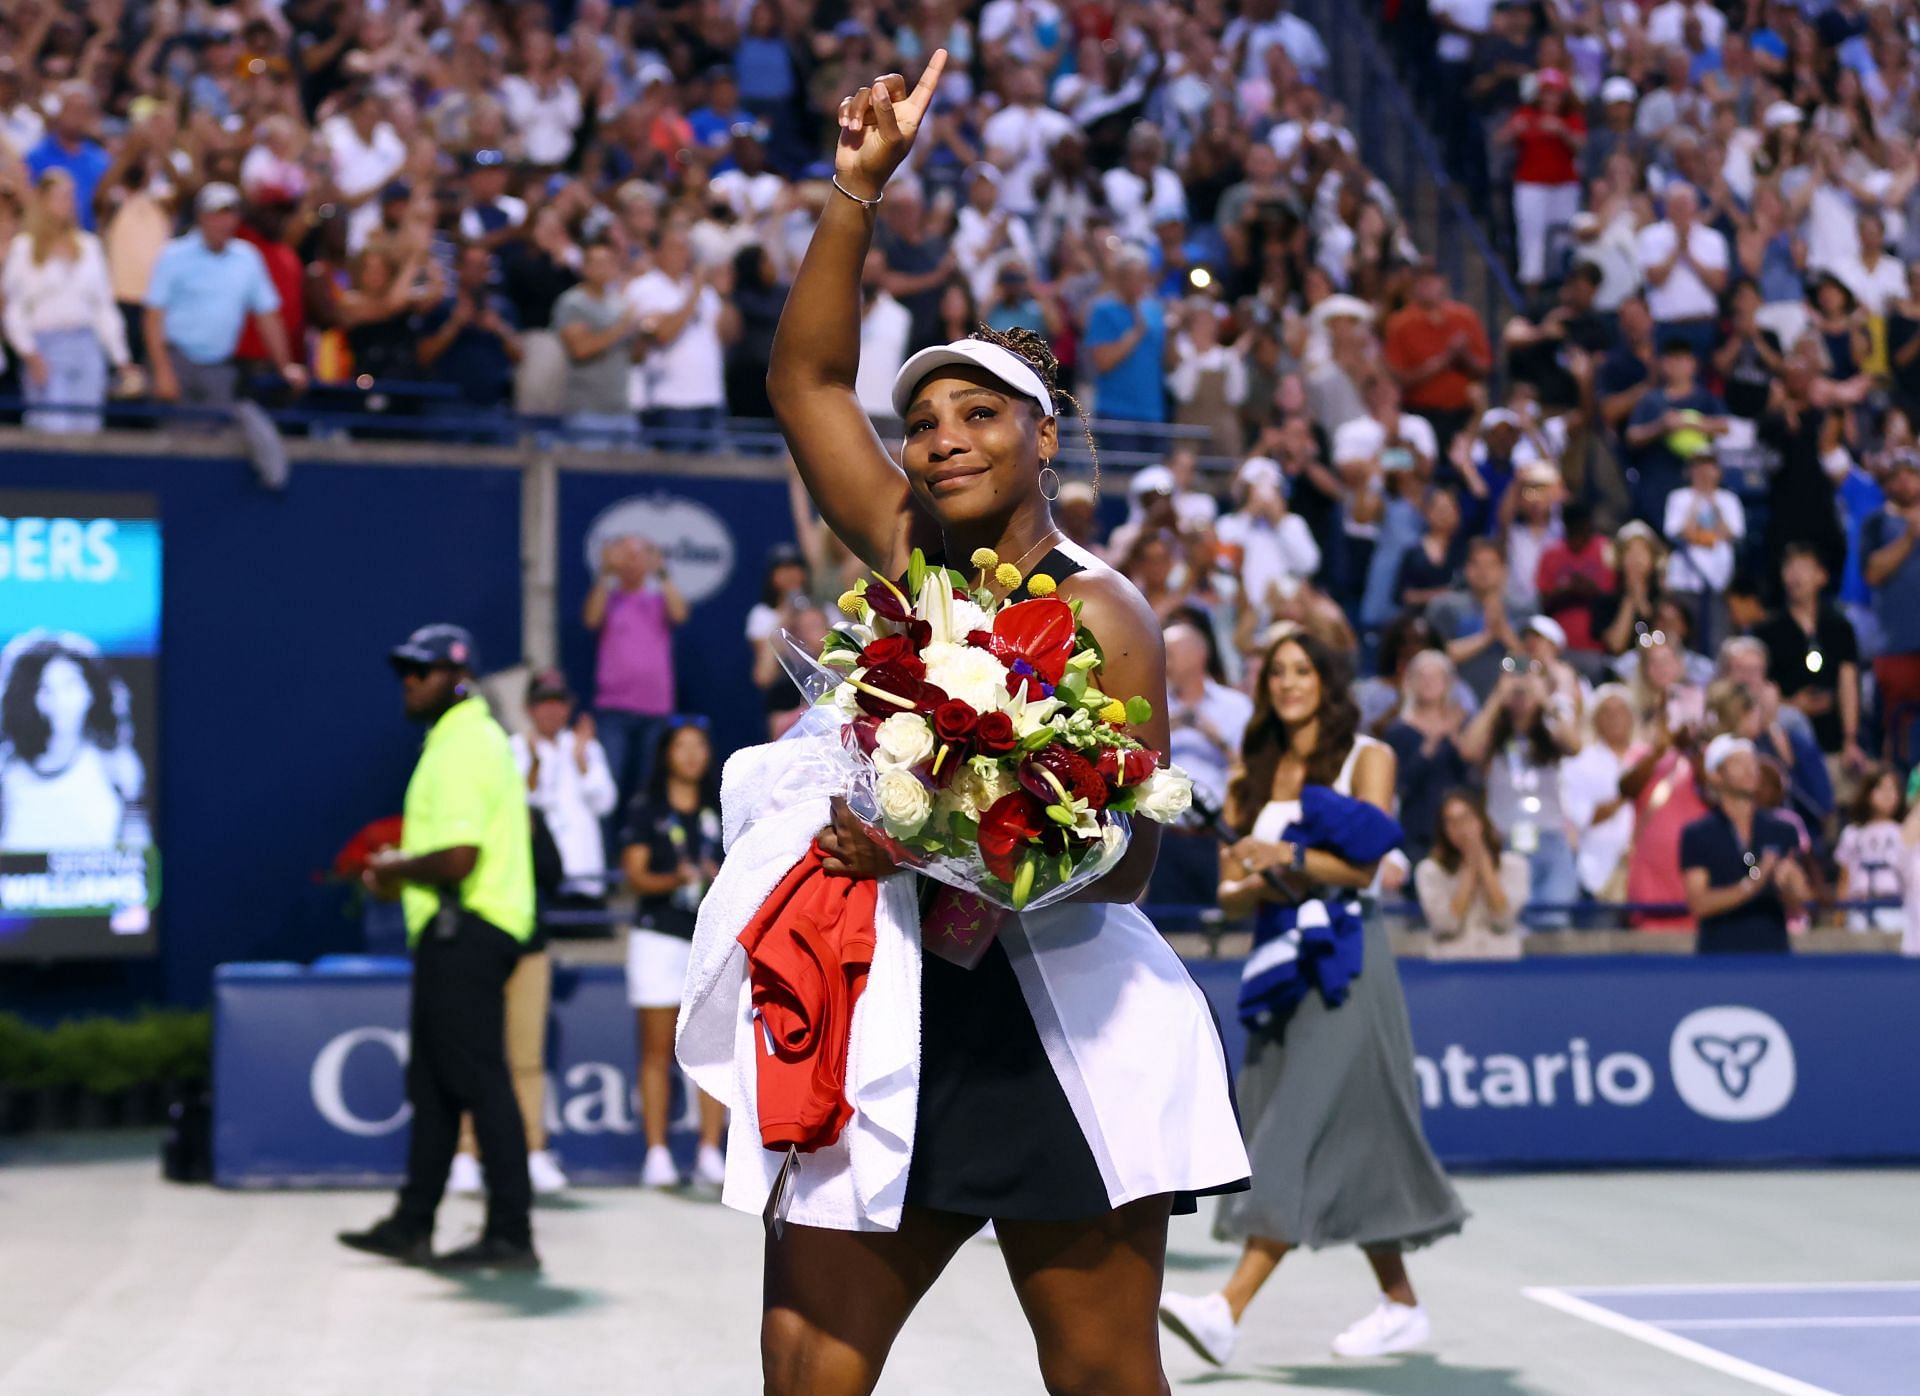 Serena Williams acknowledges the crowd after her match